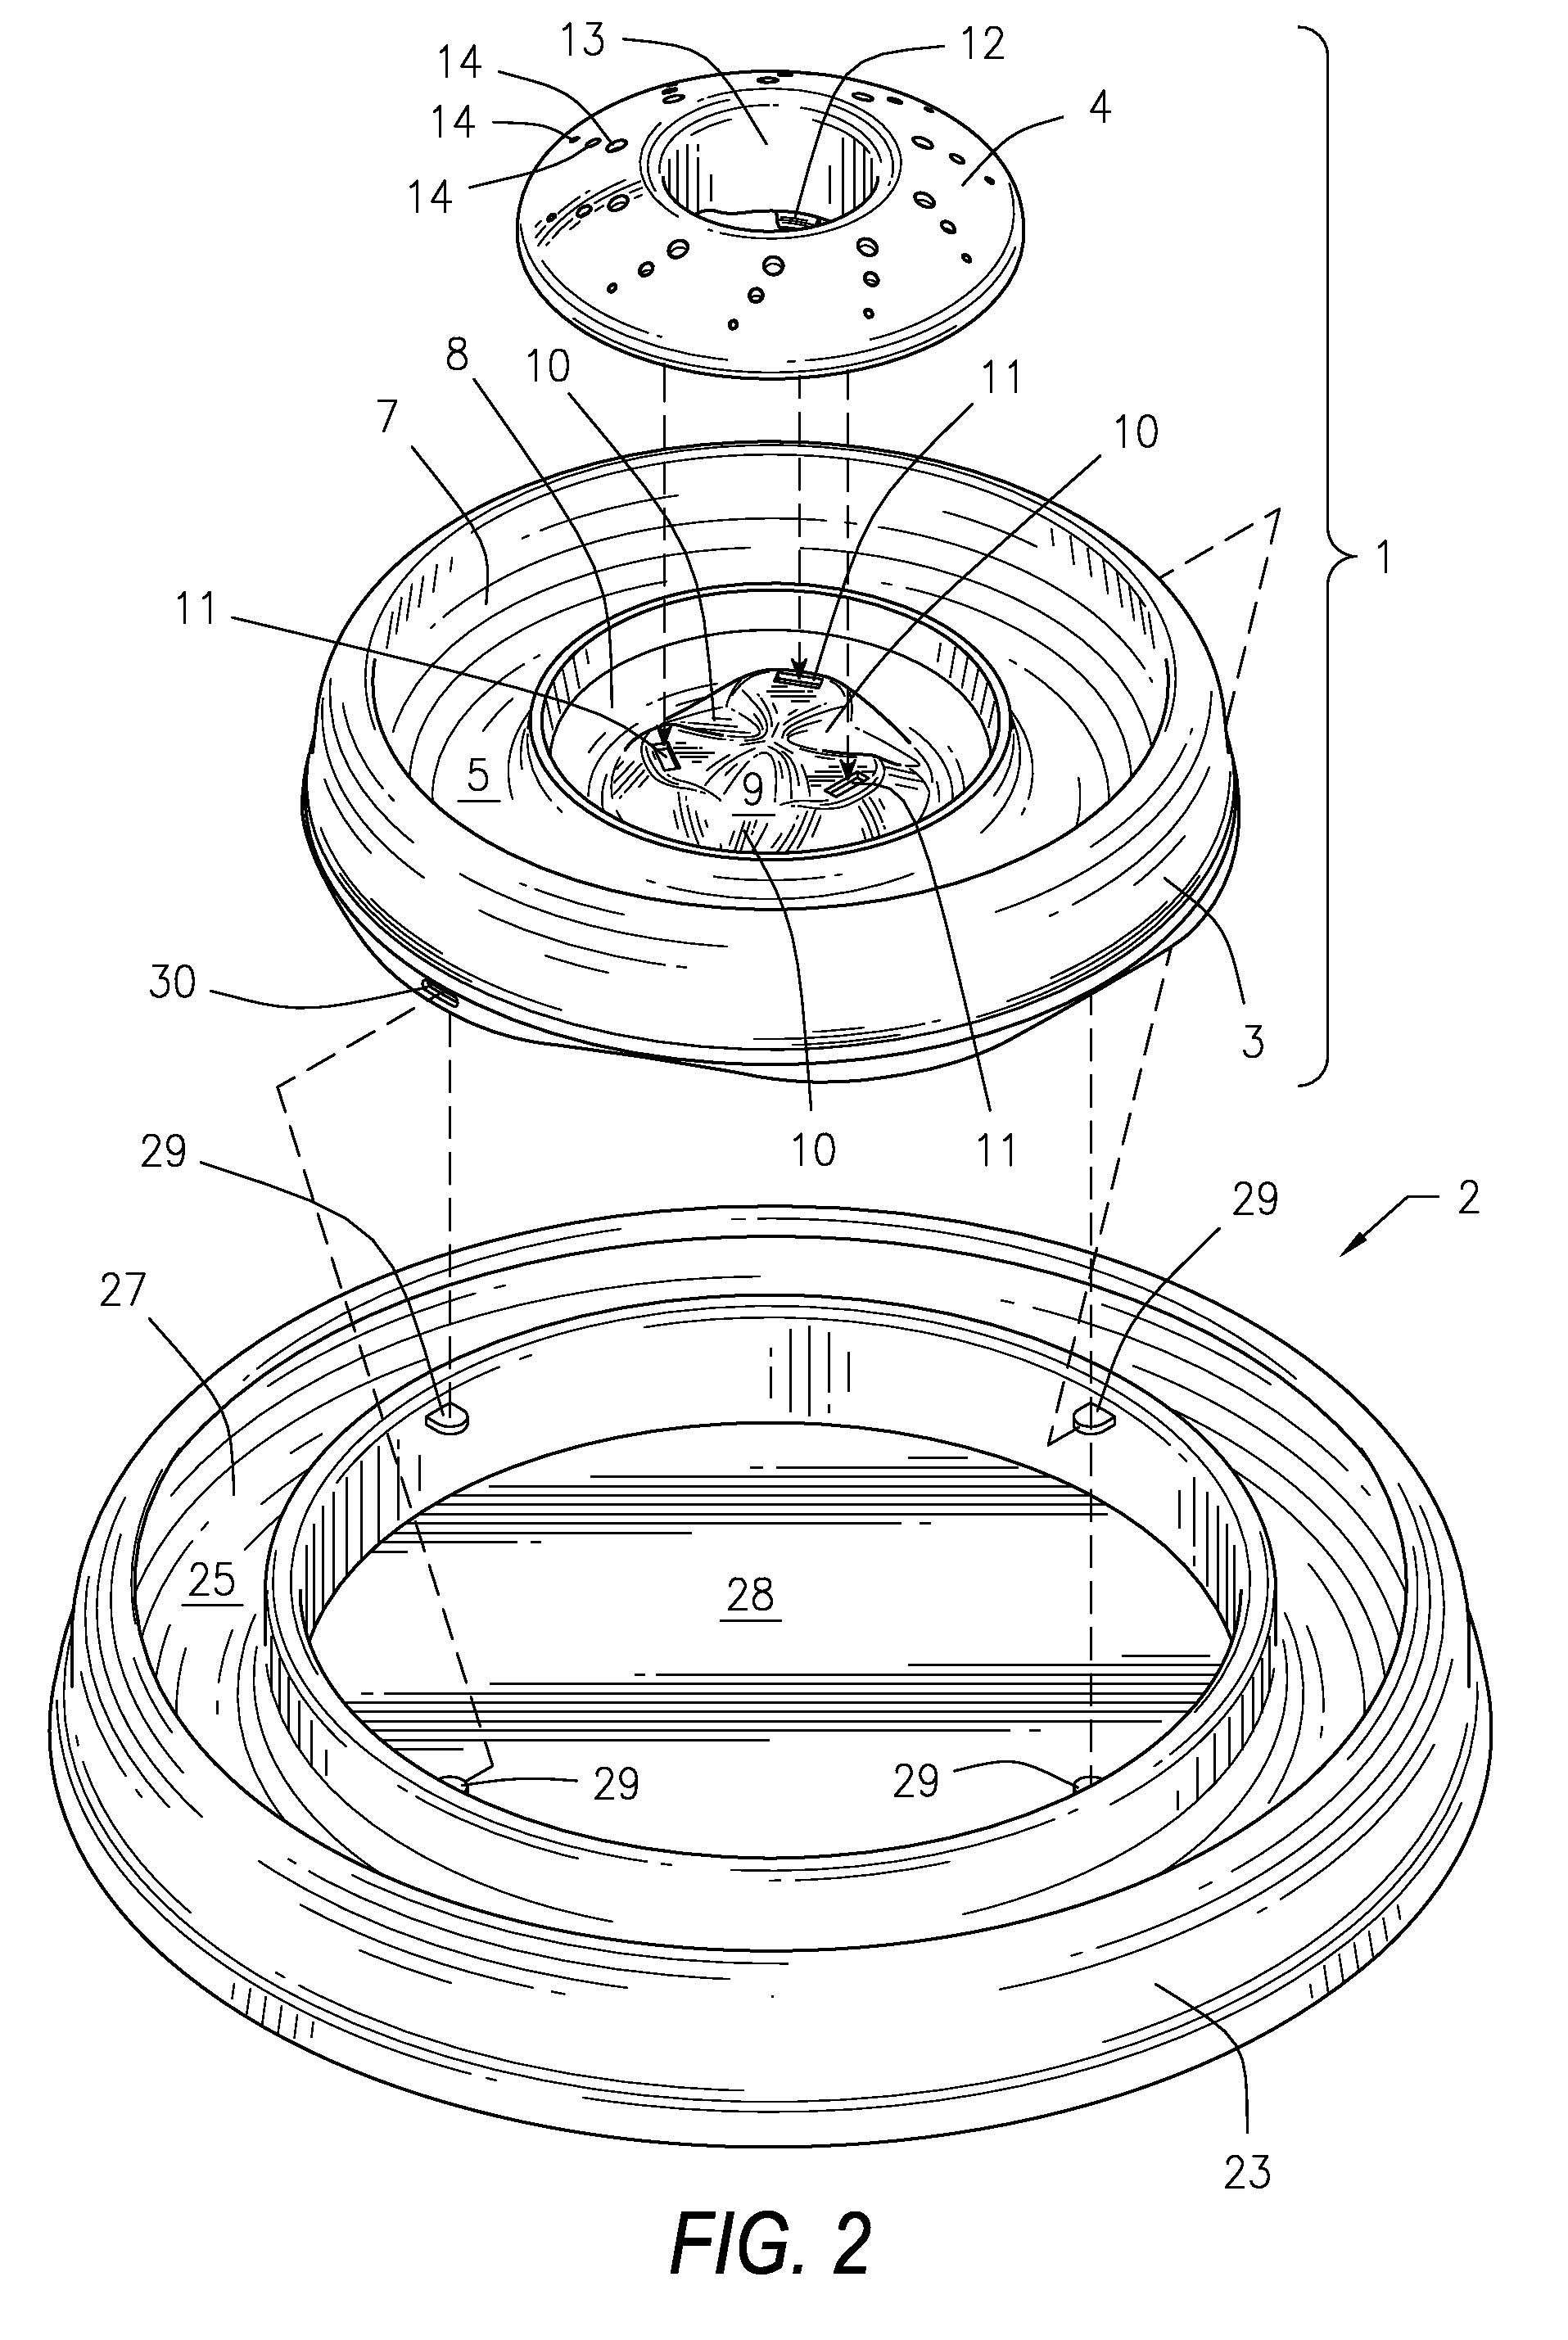 Pet amusement device with ball track and catnip receptacle